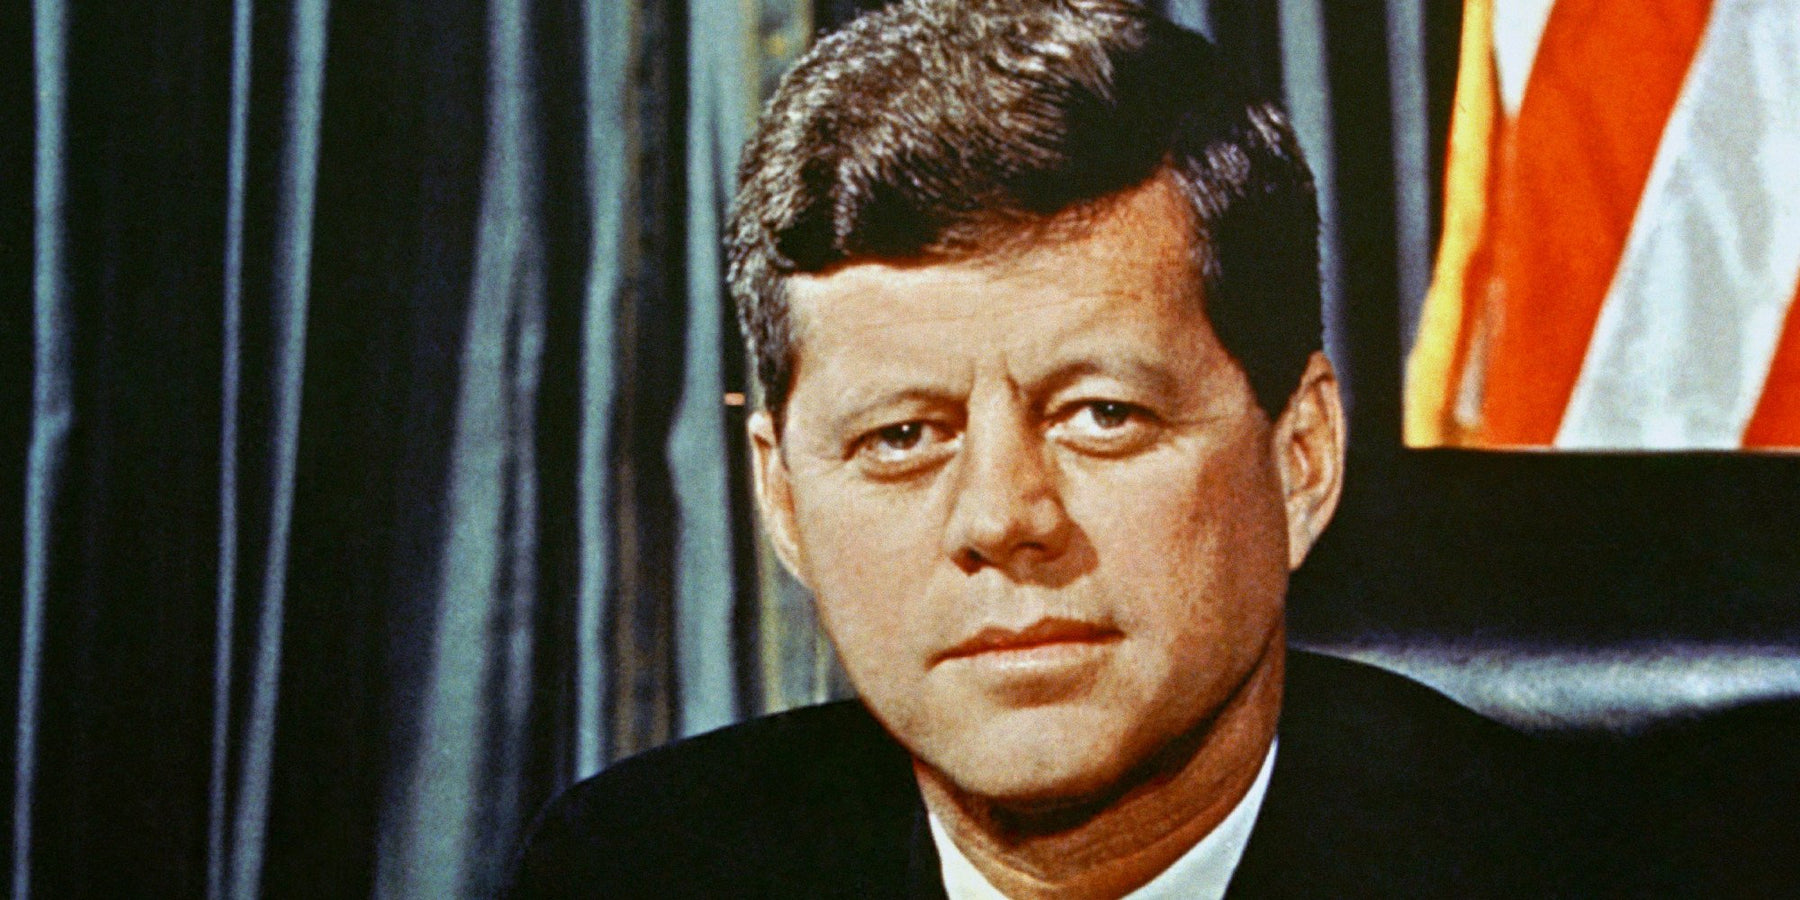 JFK Watch Being Auctioned For $100K - WatchCo.com